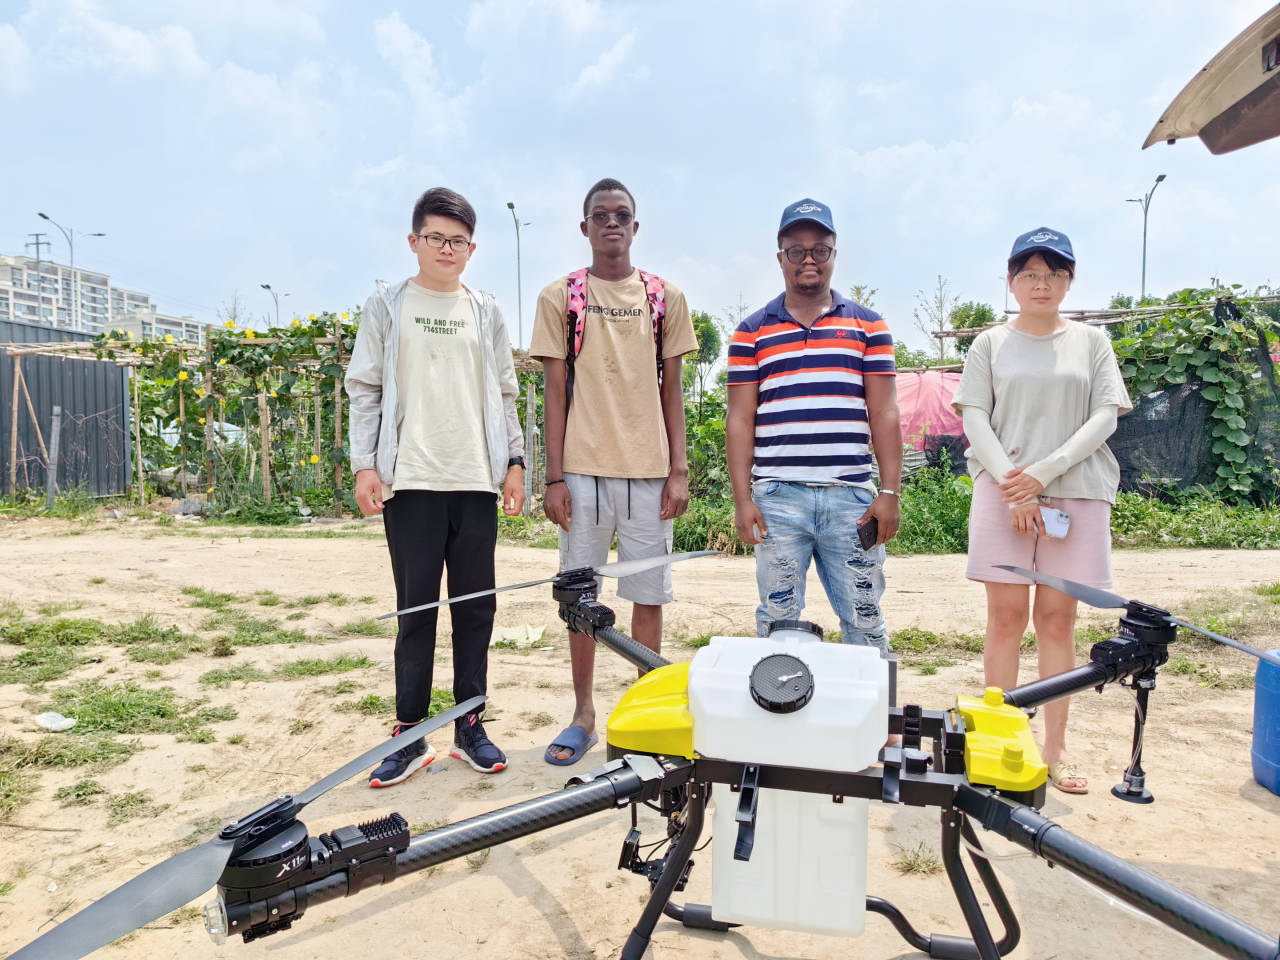 Benin customer visit Joyance agricultural sprayer drone factory in China